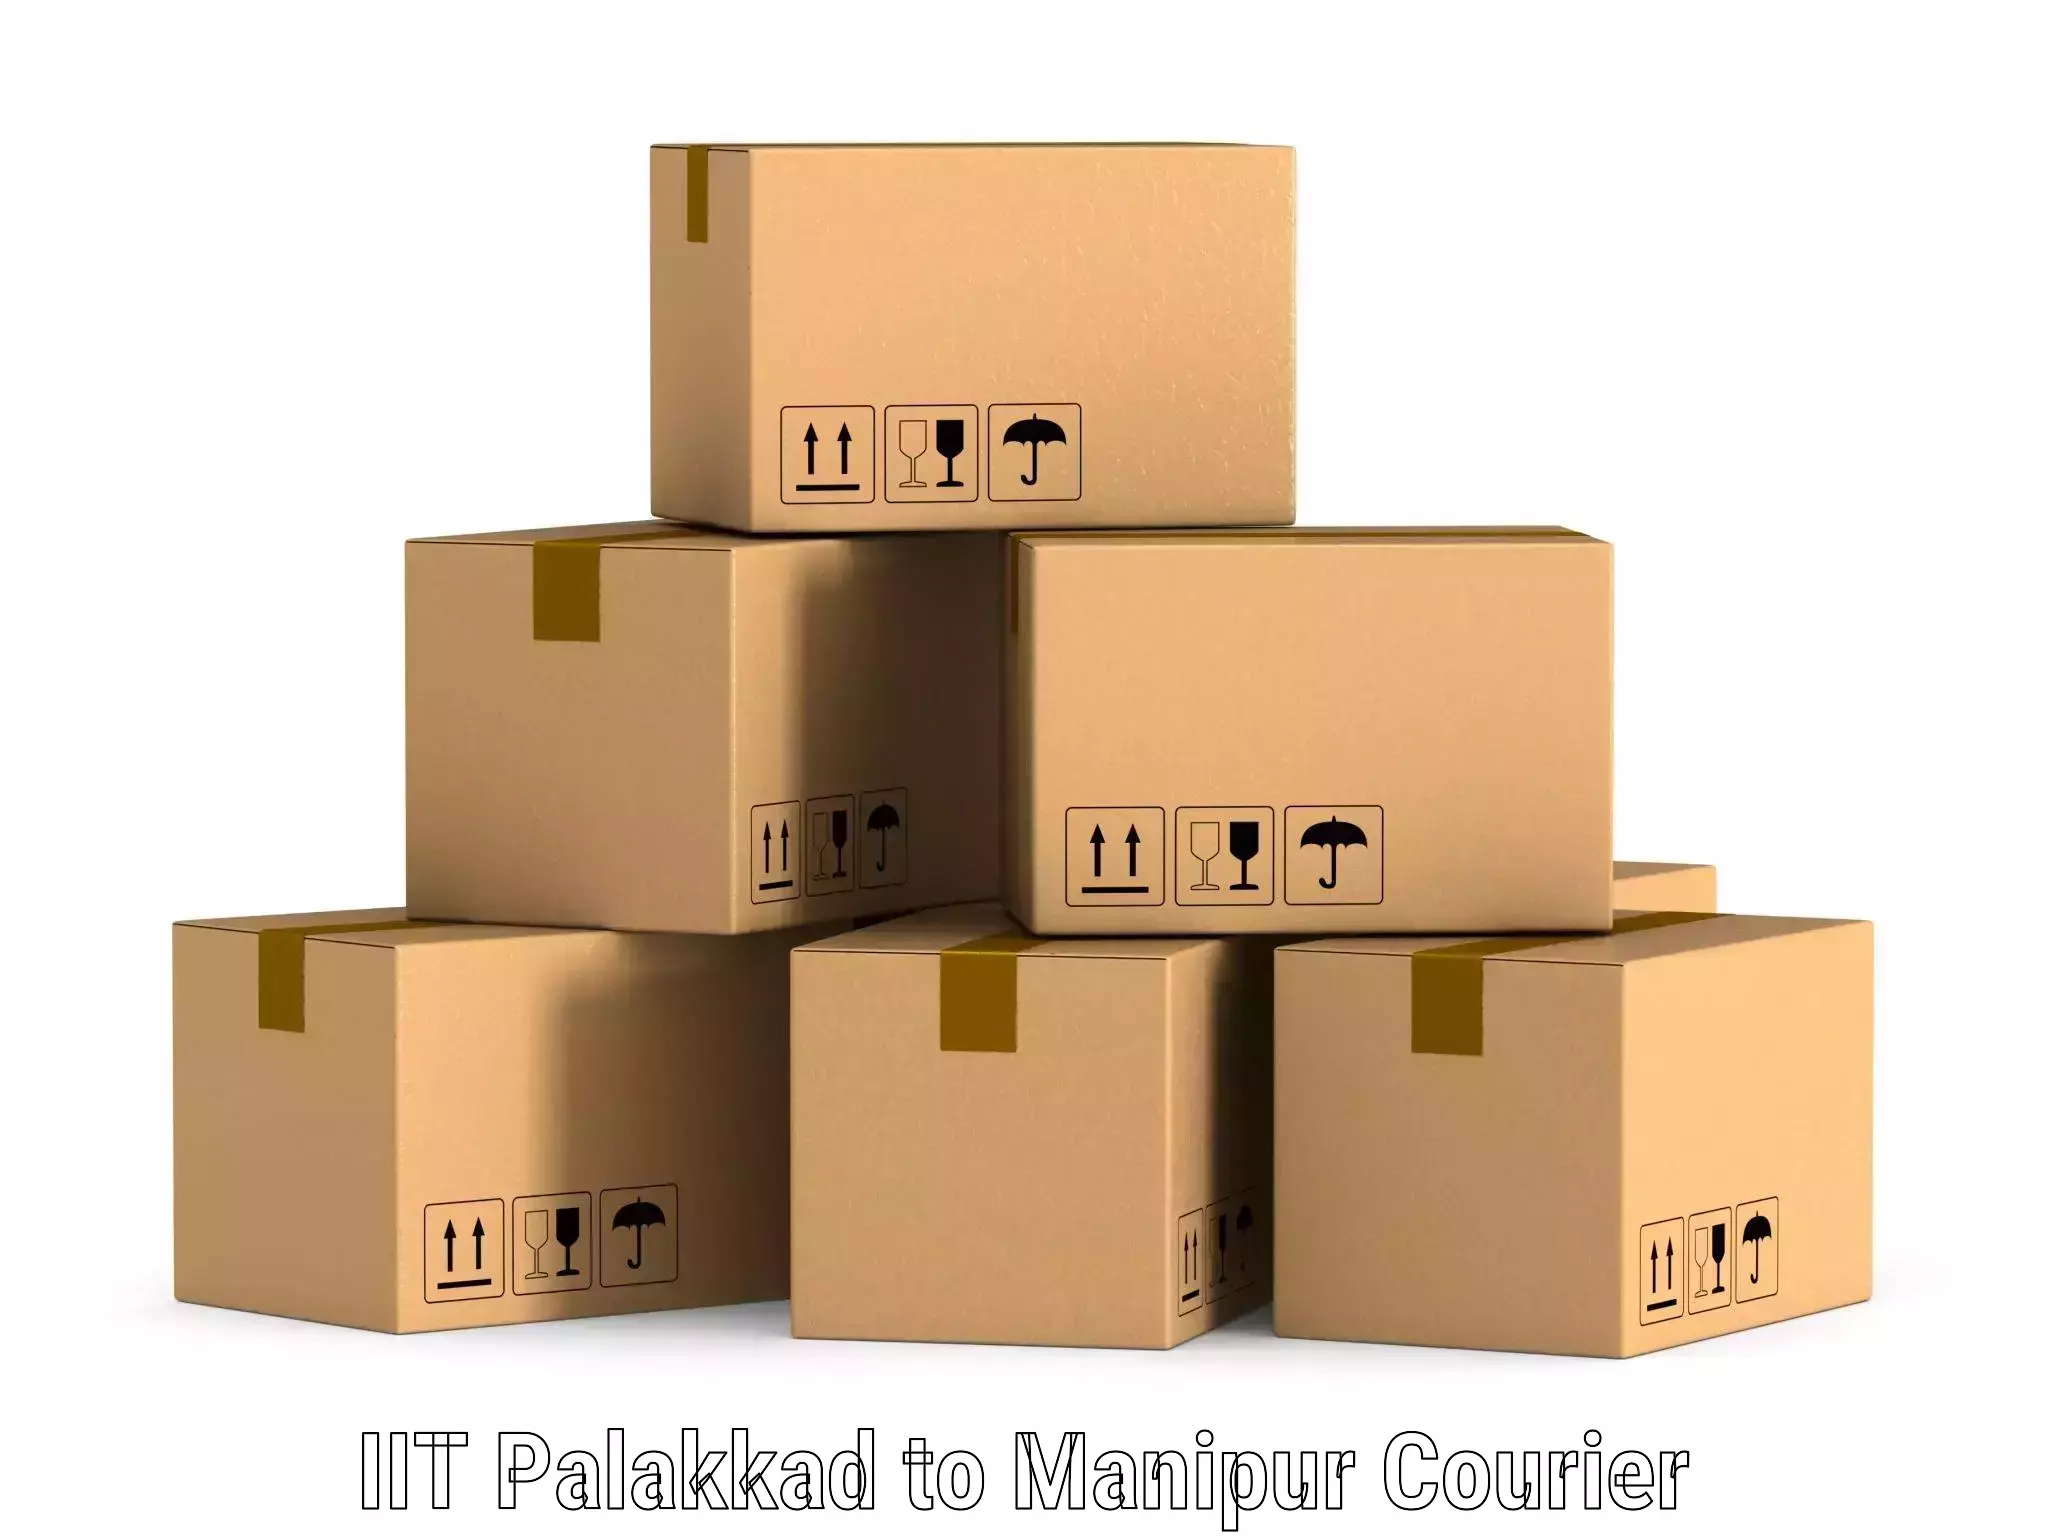 Pharmaceutical courier IIT Palakkad to Imphal